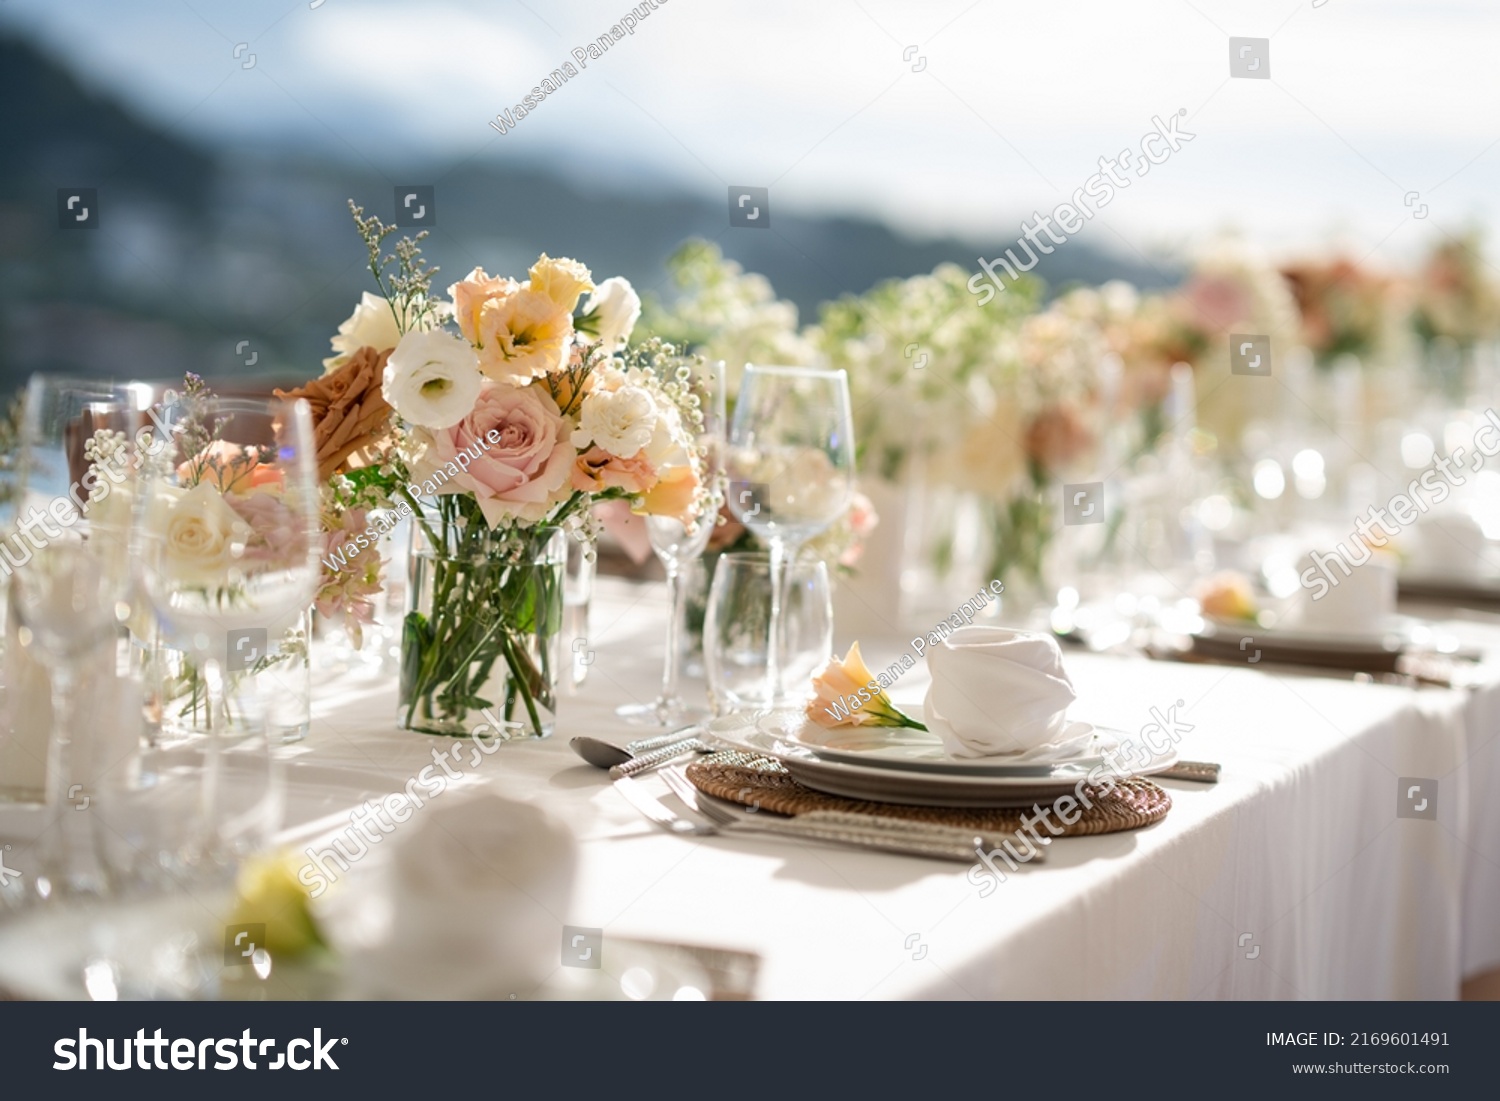 Beautiful flowers decorated on the table.Tables set for an event party or wedding reception. luxury elegant table setting dinner in a restaurant. glasses and dishes. Fancy moment fancy time. #2169601491